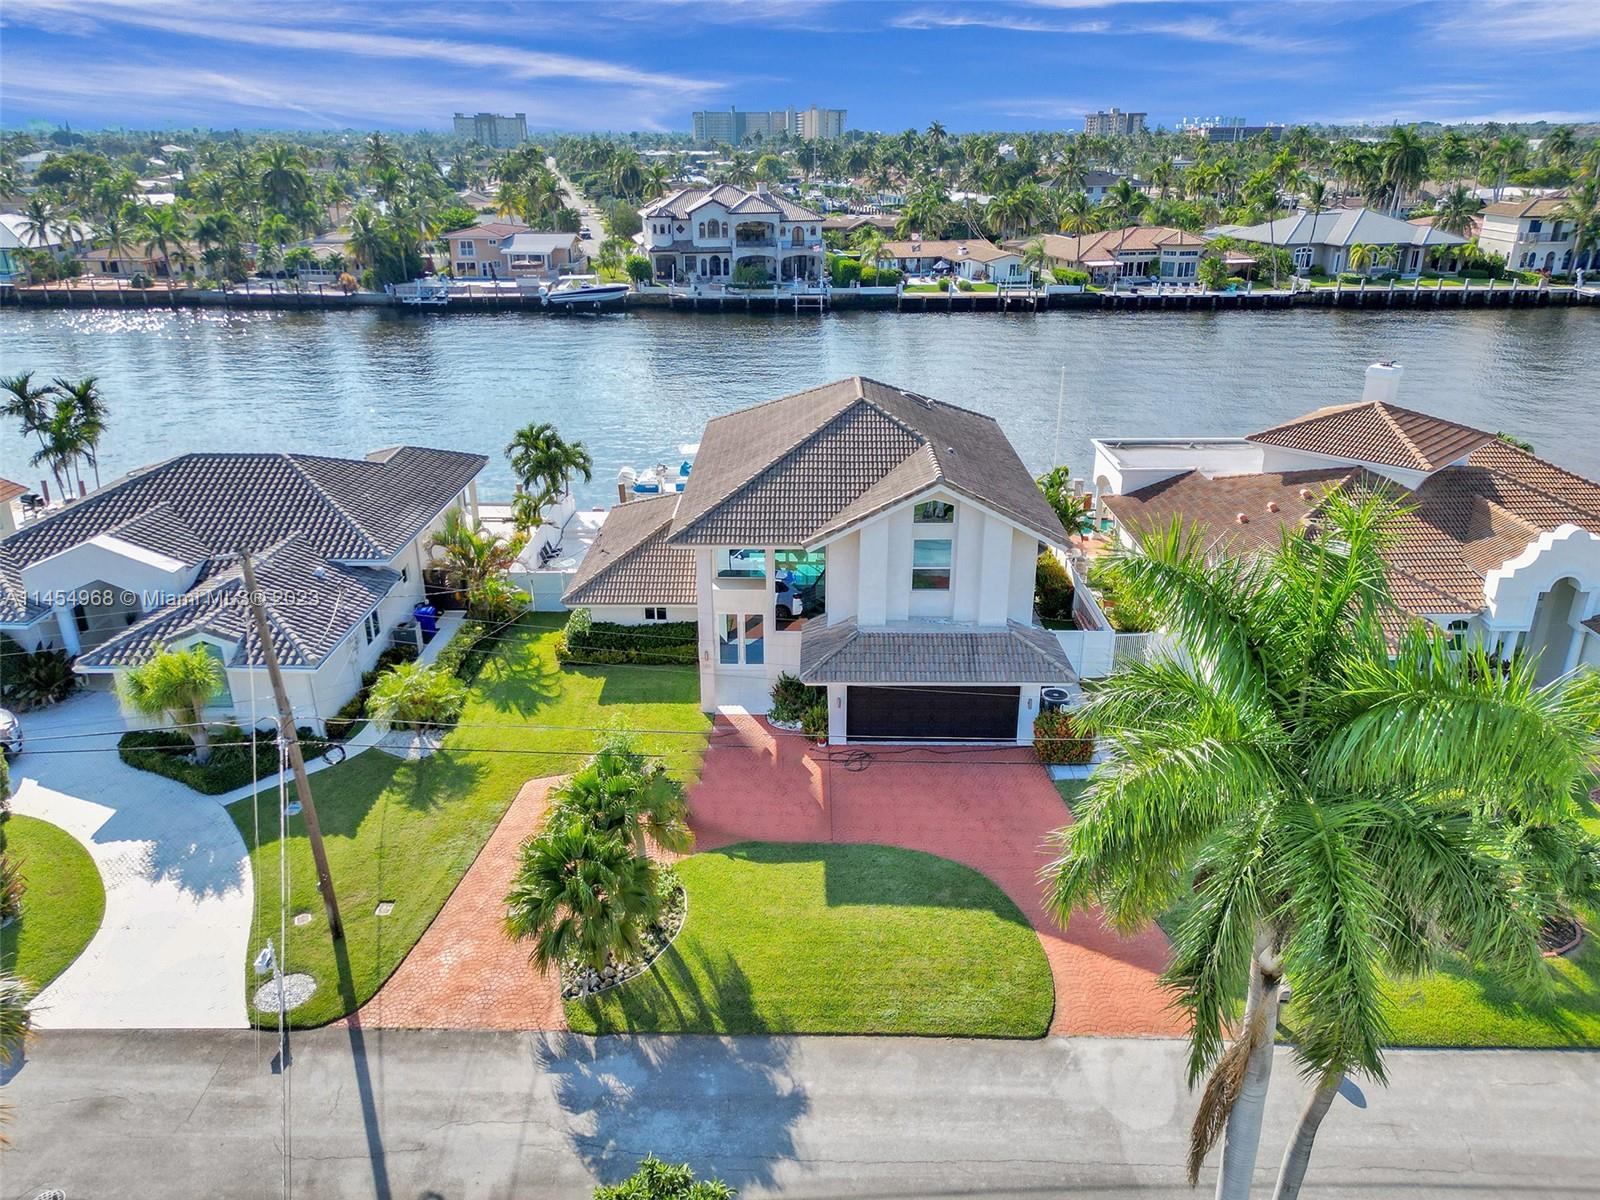 Welcome to Terra Mar, your private slice of paradise. This waterfront gem offers stunning Intracoastal views and grand, airy spaces. Imagine lounging on a lavish patio, pool drink in hand, making every moment unforgettable. Your boat's secure here, thanks to top-notch seawall and dock facilities. Wander over to Lauderdale by the Sea for unique shops, oceanfront eats, and that cozy fishing pier vibe. Inside, find two master suites offering serene escapes on each level. The kitchen? A chef's dream with a Steam Oven, ready for your culinary adventures. Revamped in 2018, this home is for those who live for luxury. It's more than an address; it's a lifestyle. Ready for the full story? Contact Minerva Strum today.